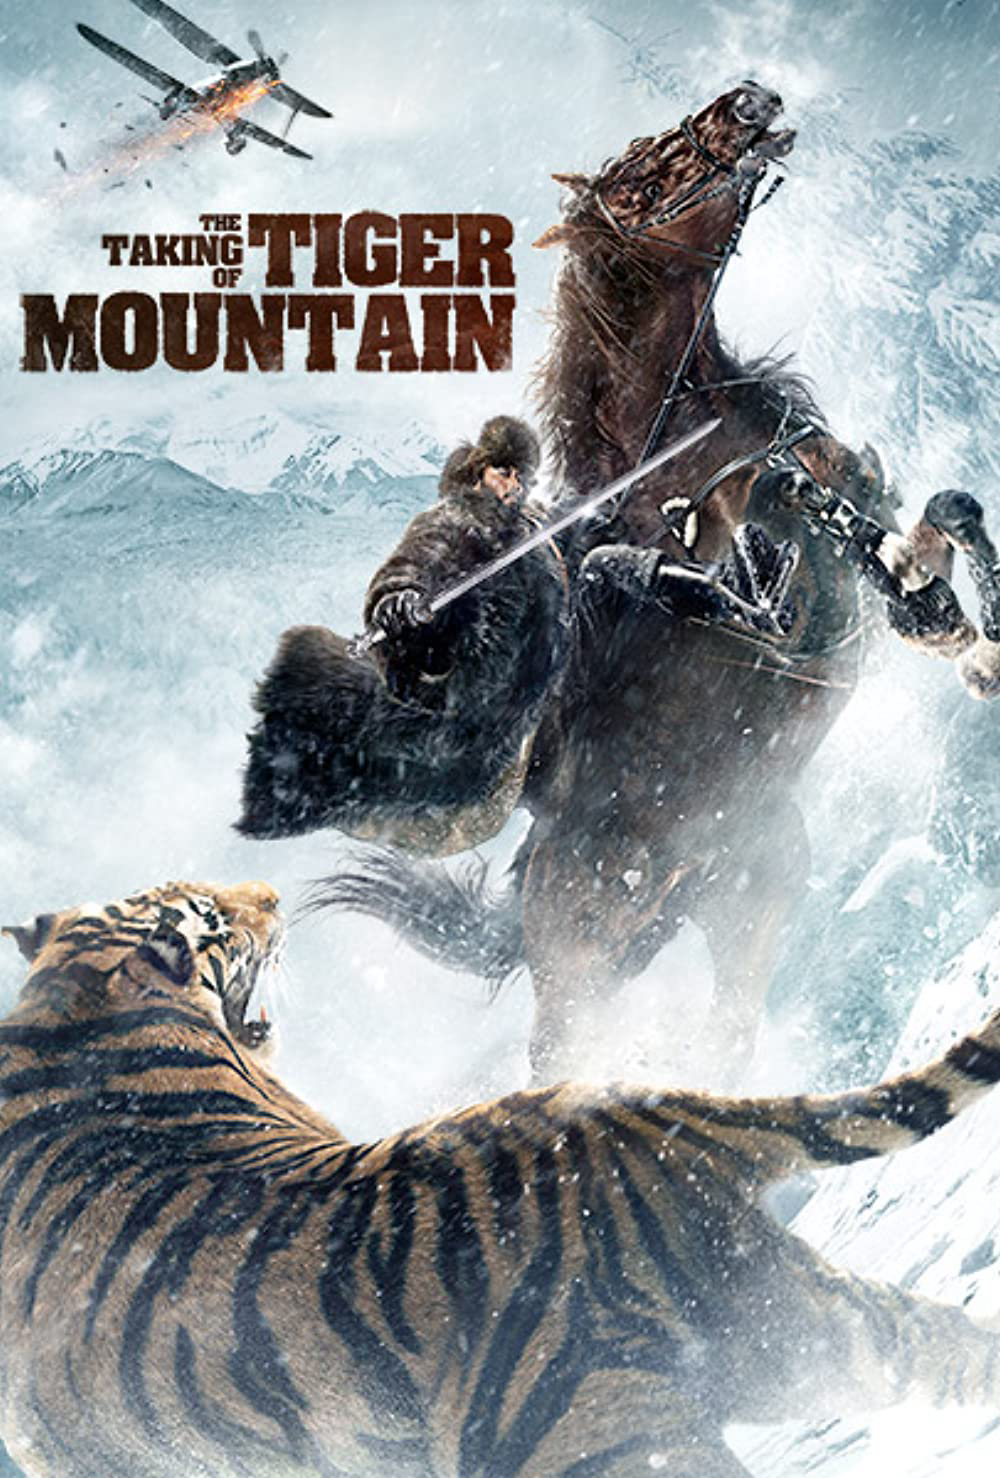 Poster Phim Trí Thủ Uy Hổ Sơn (The Taking Of Tiger Mountain)